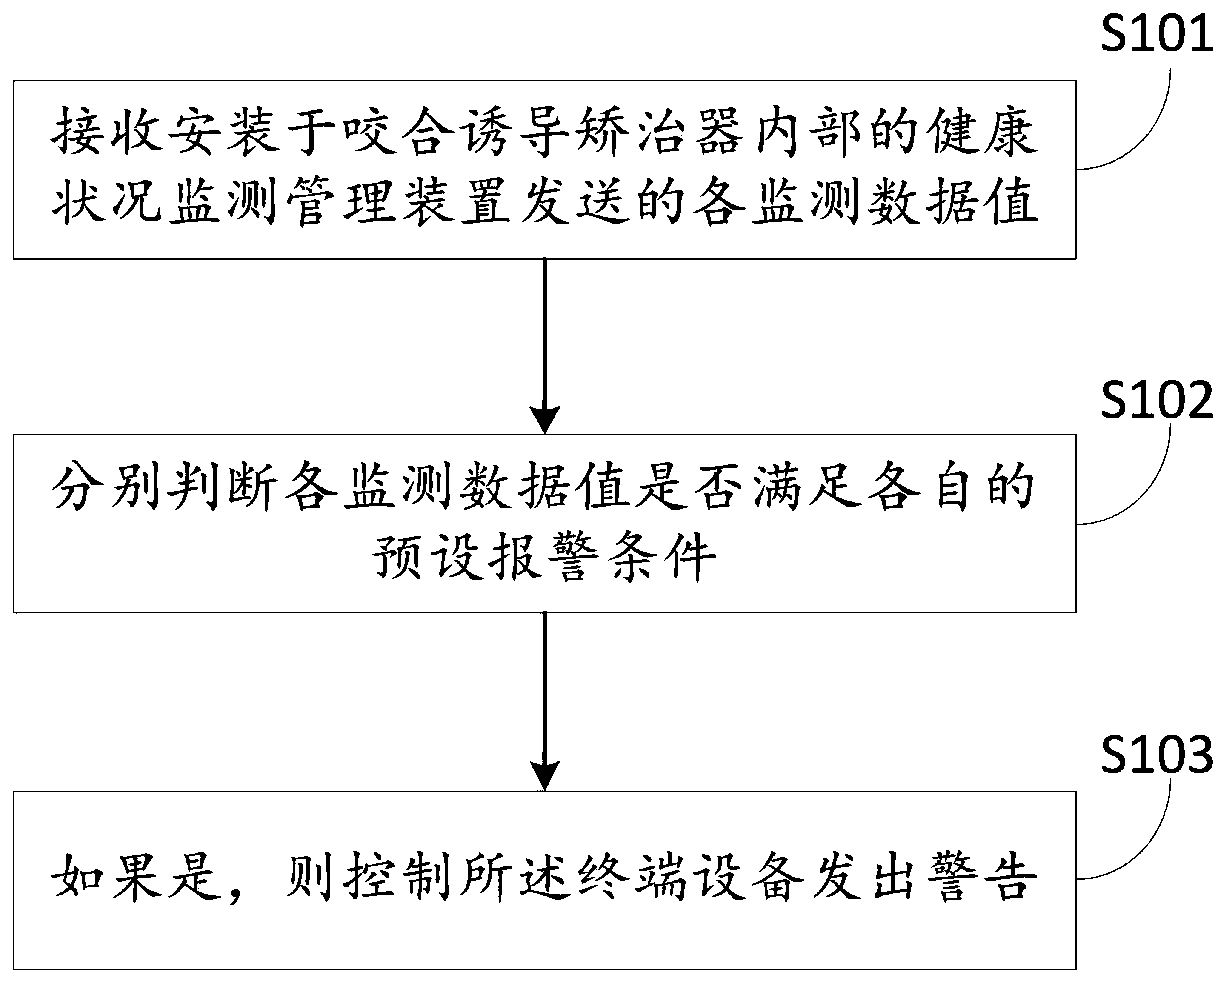 Health condition monitoring and management device and method